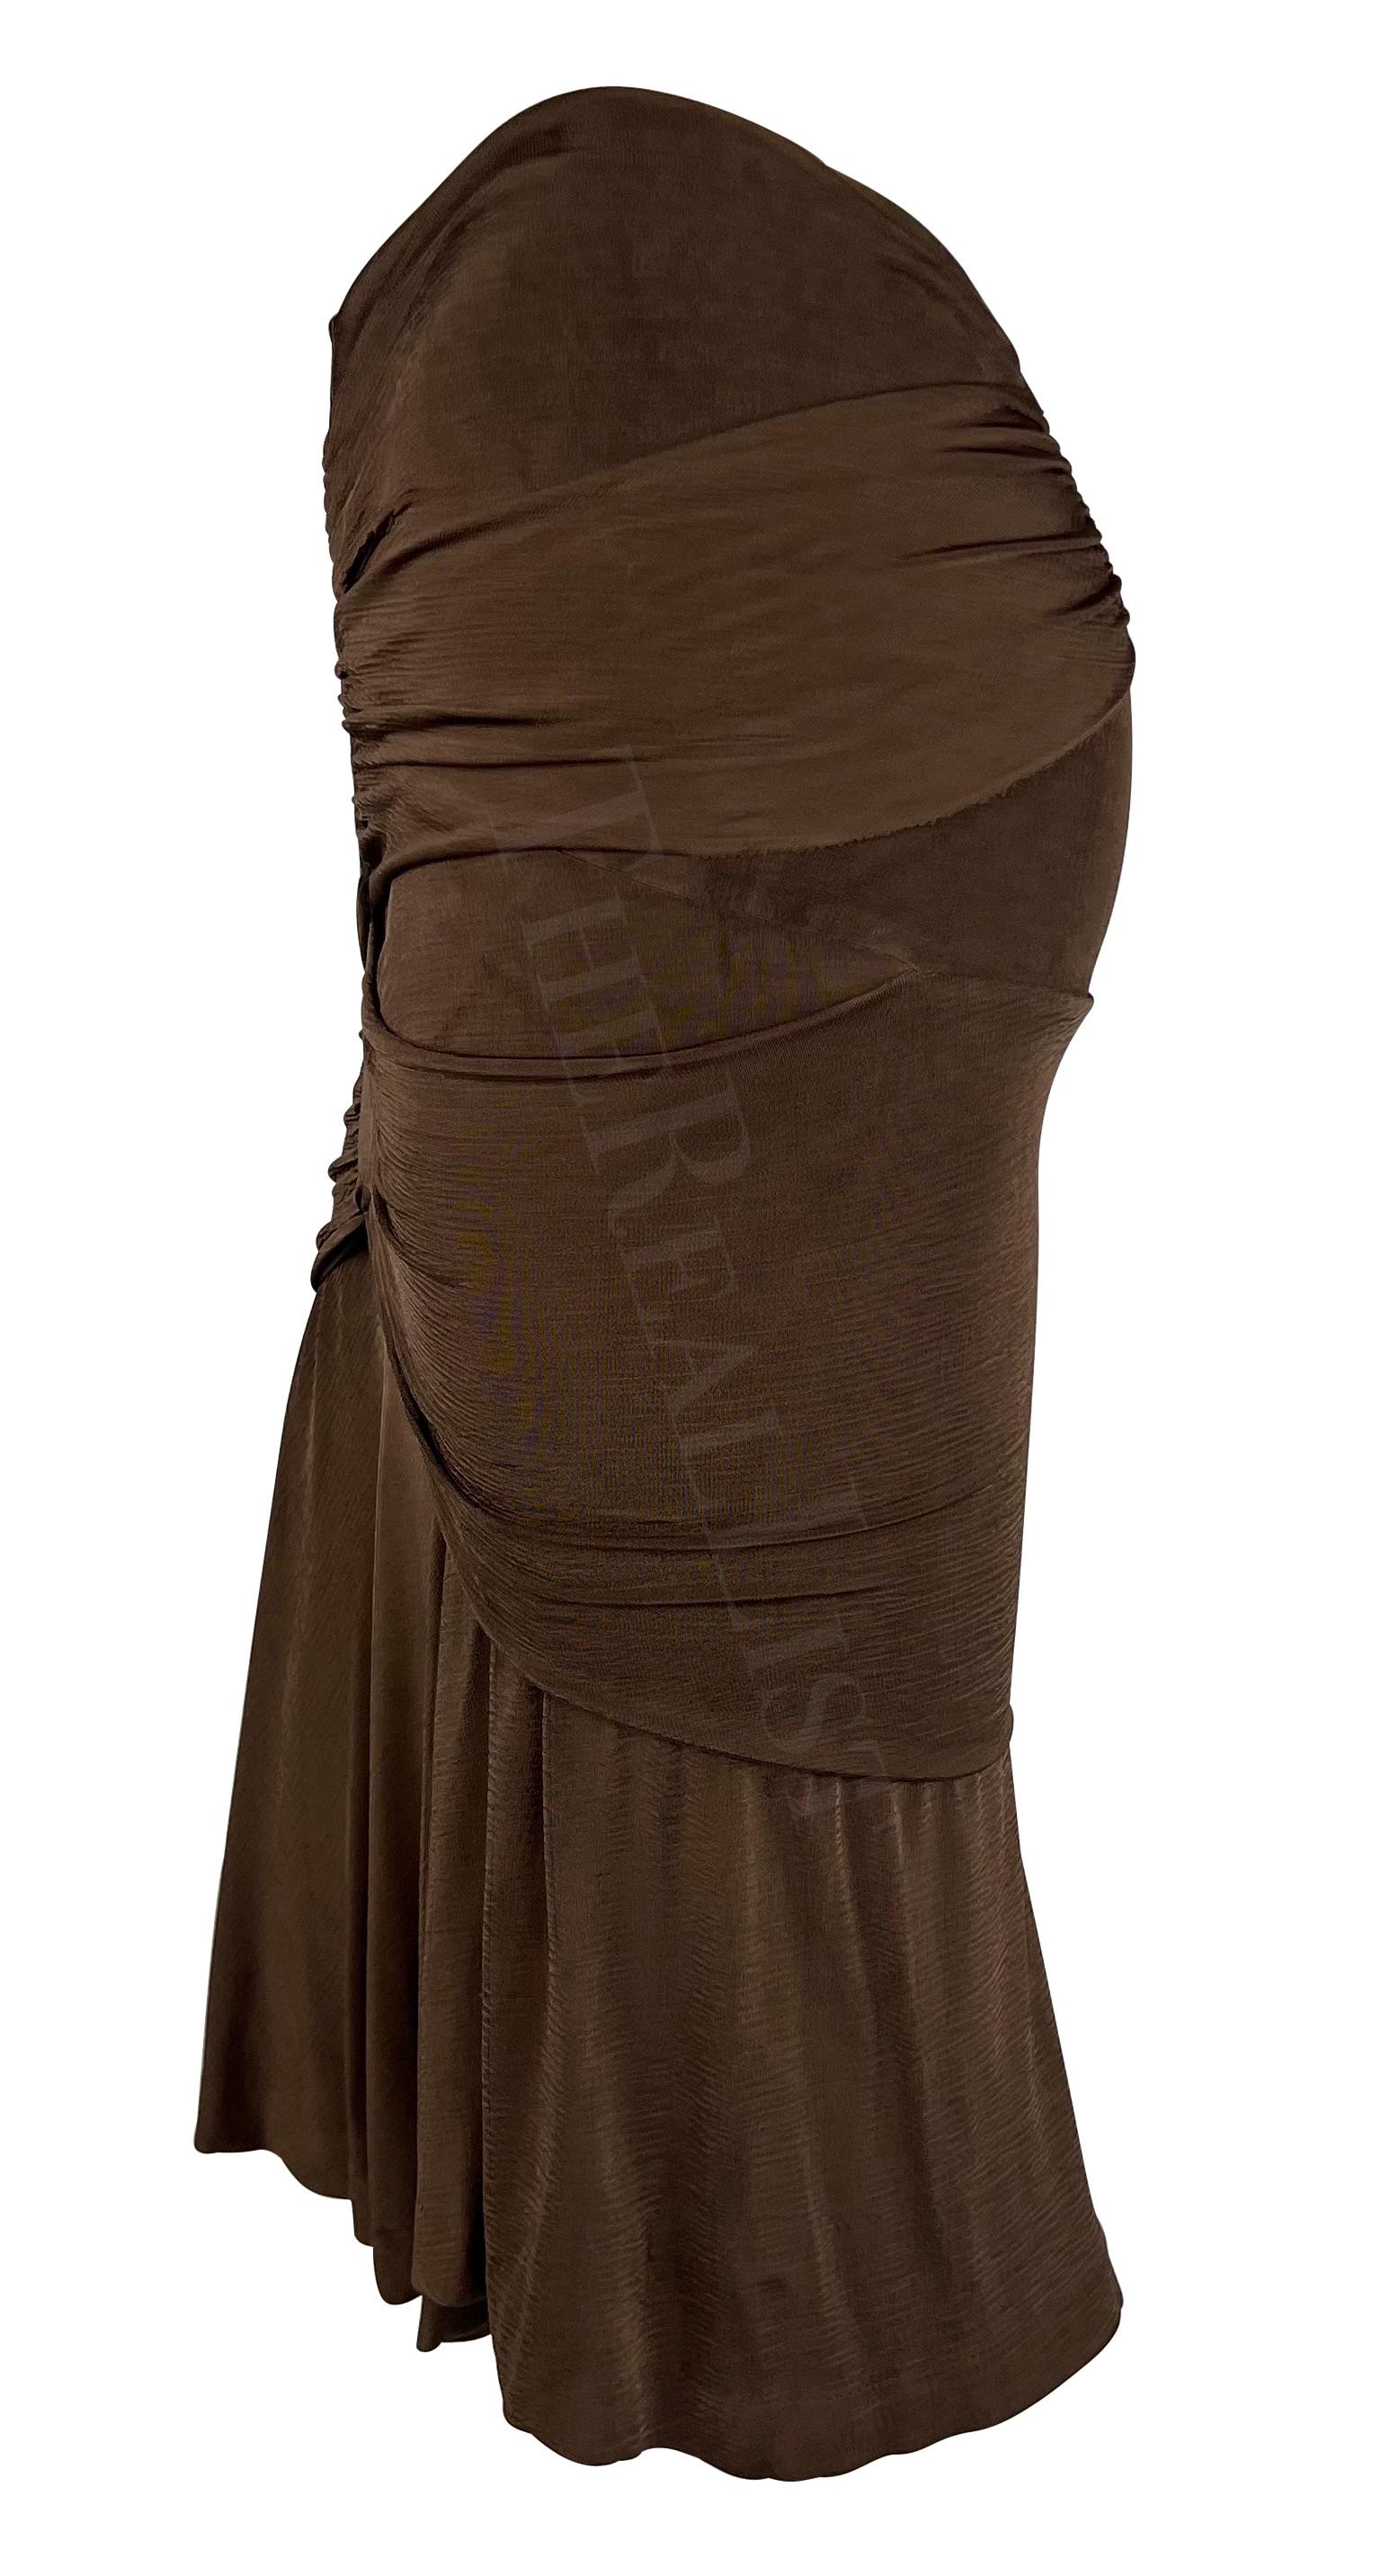 S/S 2003 Yves Saint Laurent by Tom Ford Runway Brown Ruched Slinky Skirt For Sale 1